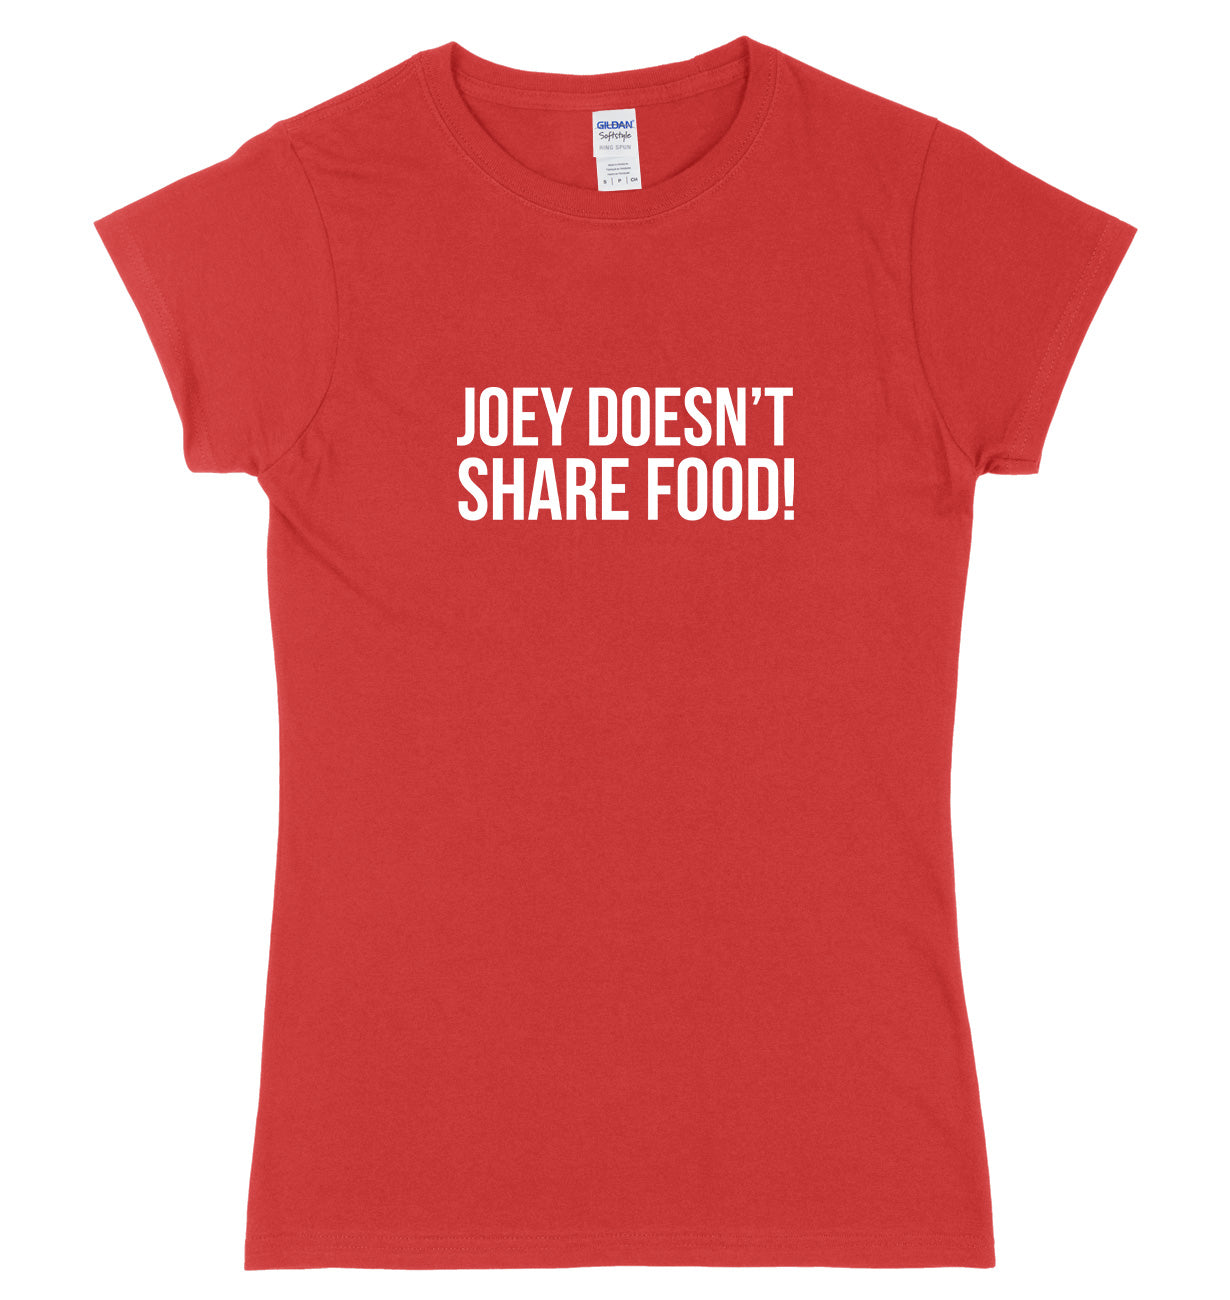 Joey Doesn't Share Food Womens Ladies Slim Fit T-Shirt